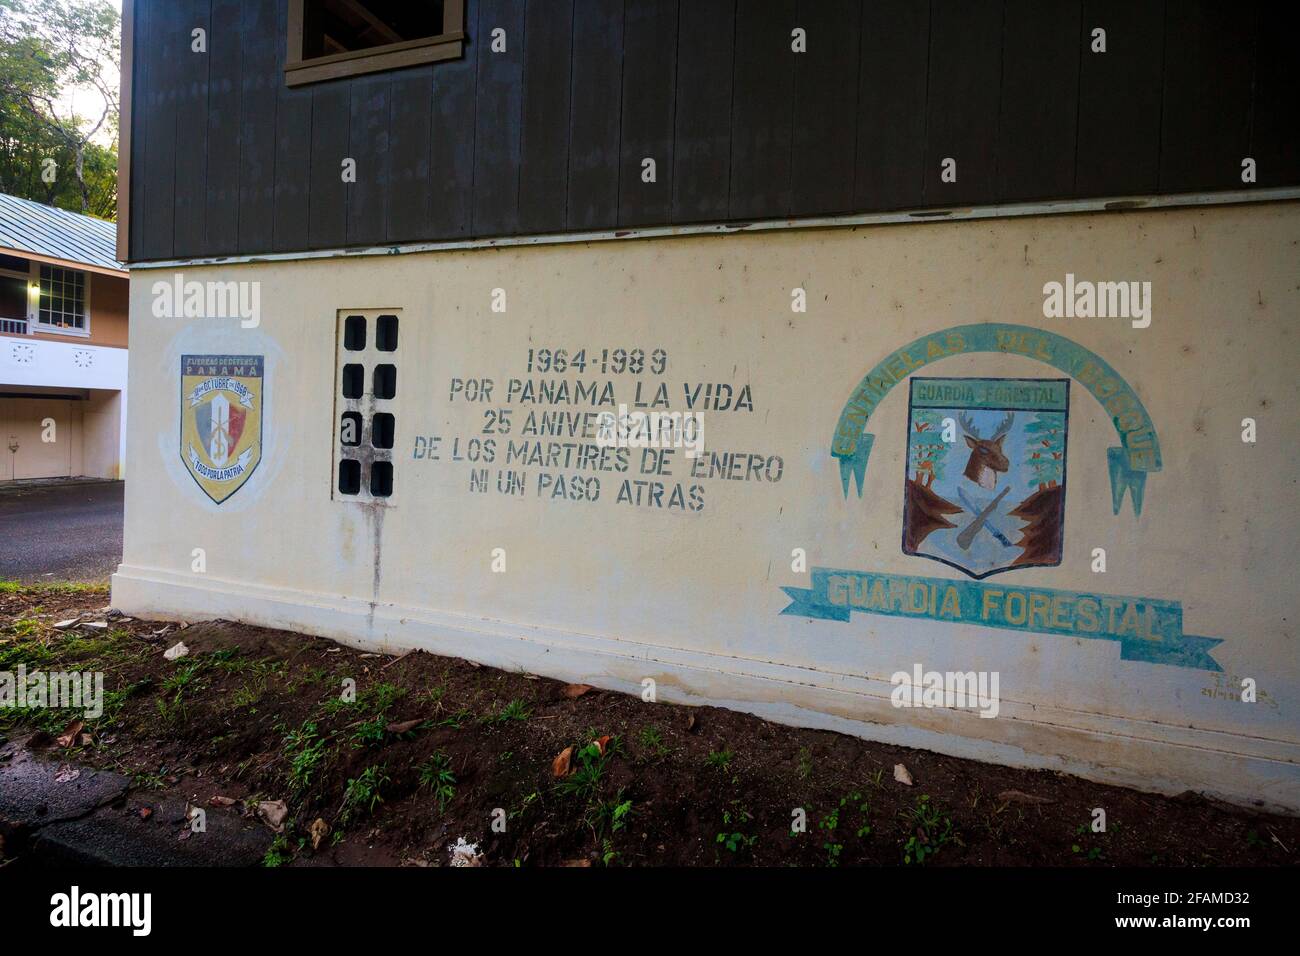 Wall painting with banners and text on the old police station building in the town of Gamboa, Colon province, Republic of Panama, Central America. Stock Photo